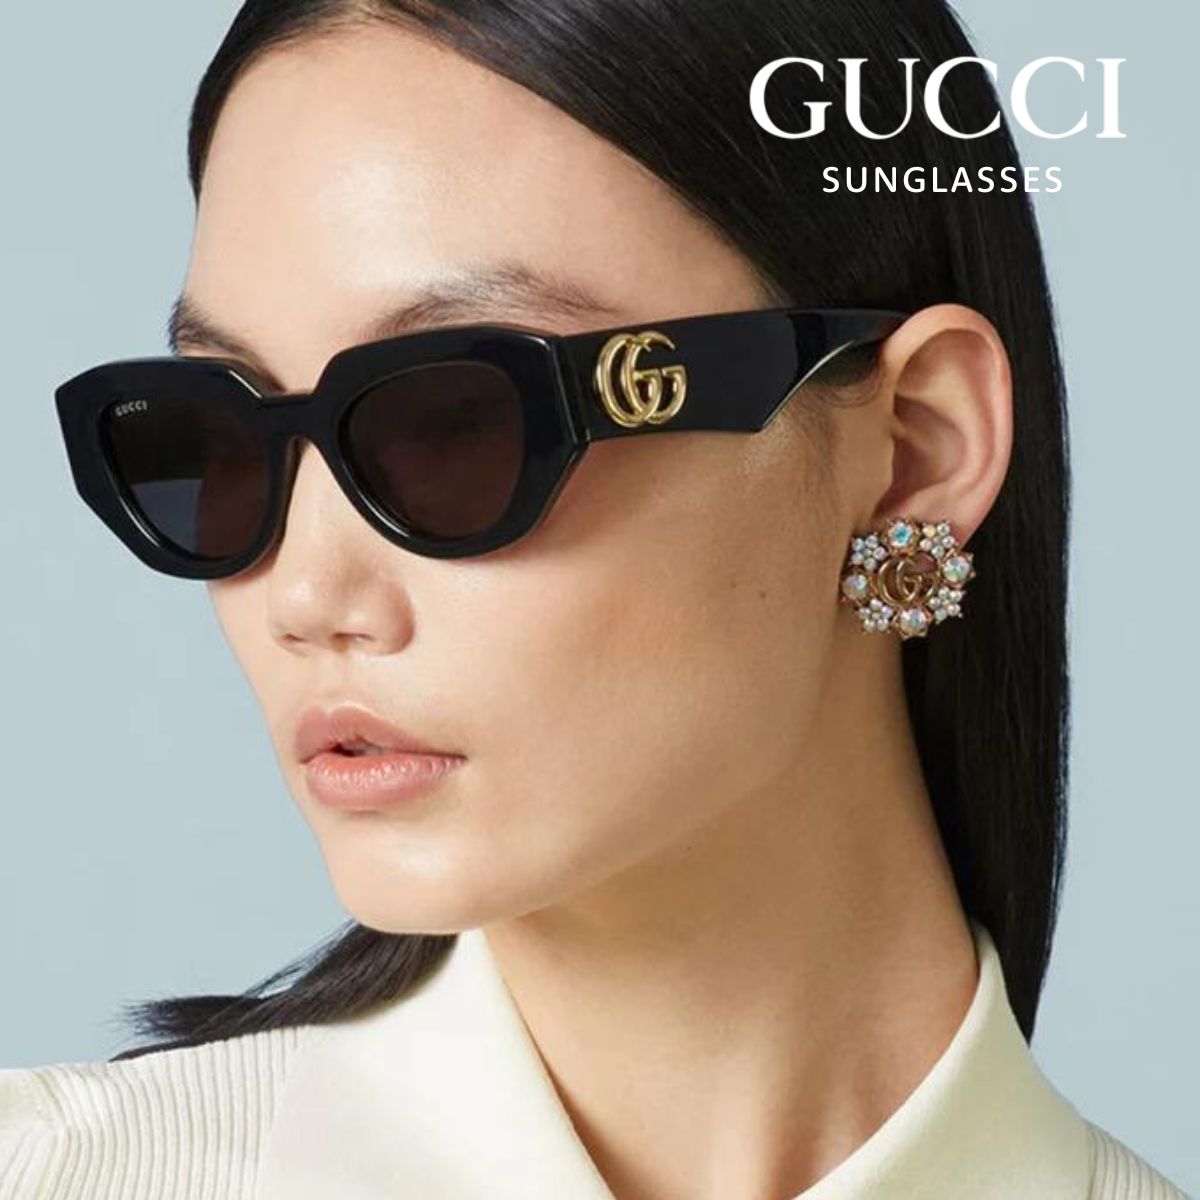 "Gucci sunglasses for men and women at Optorium: latest, stylish, trendy shades."